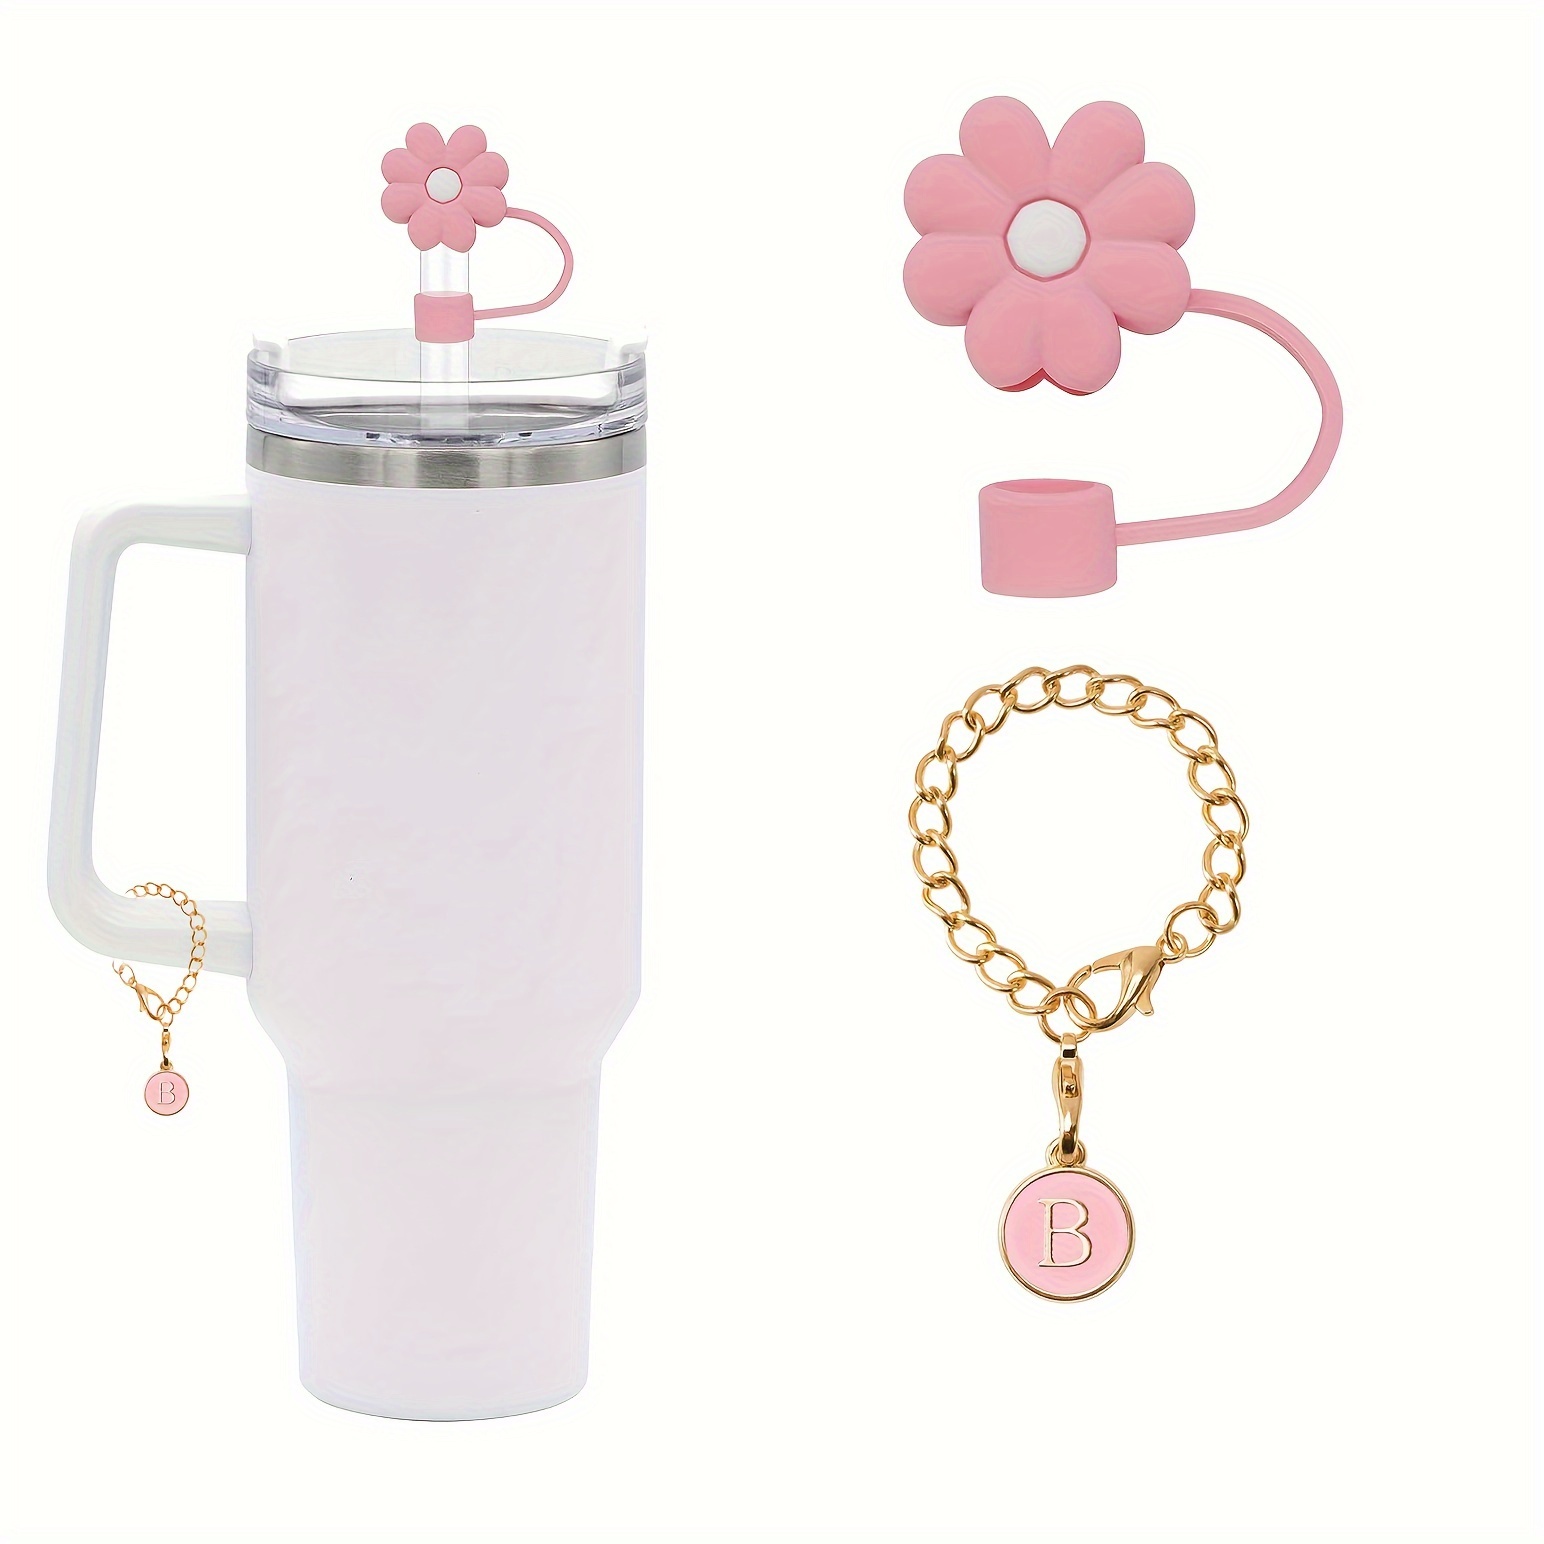 Stanley Tumbler Inspired Straw Charms 